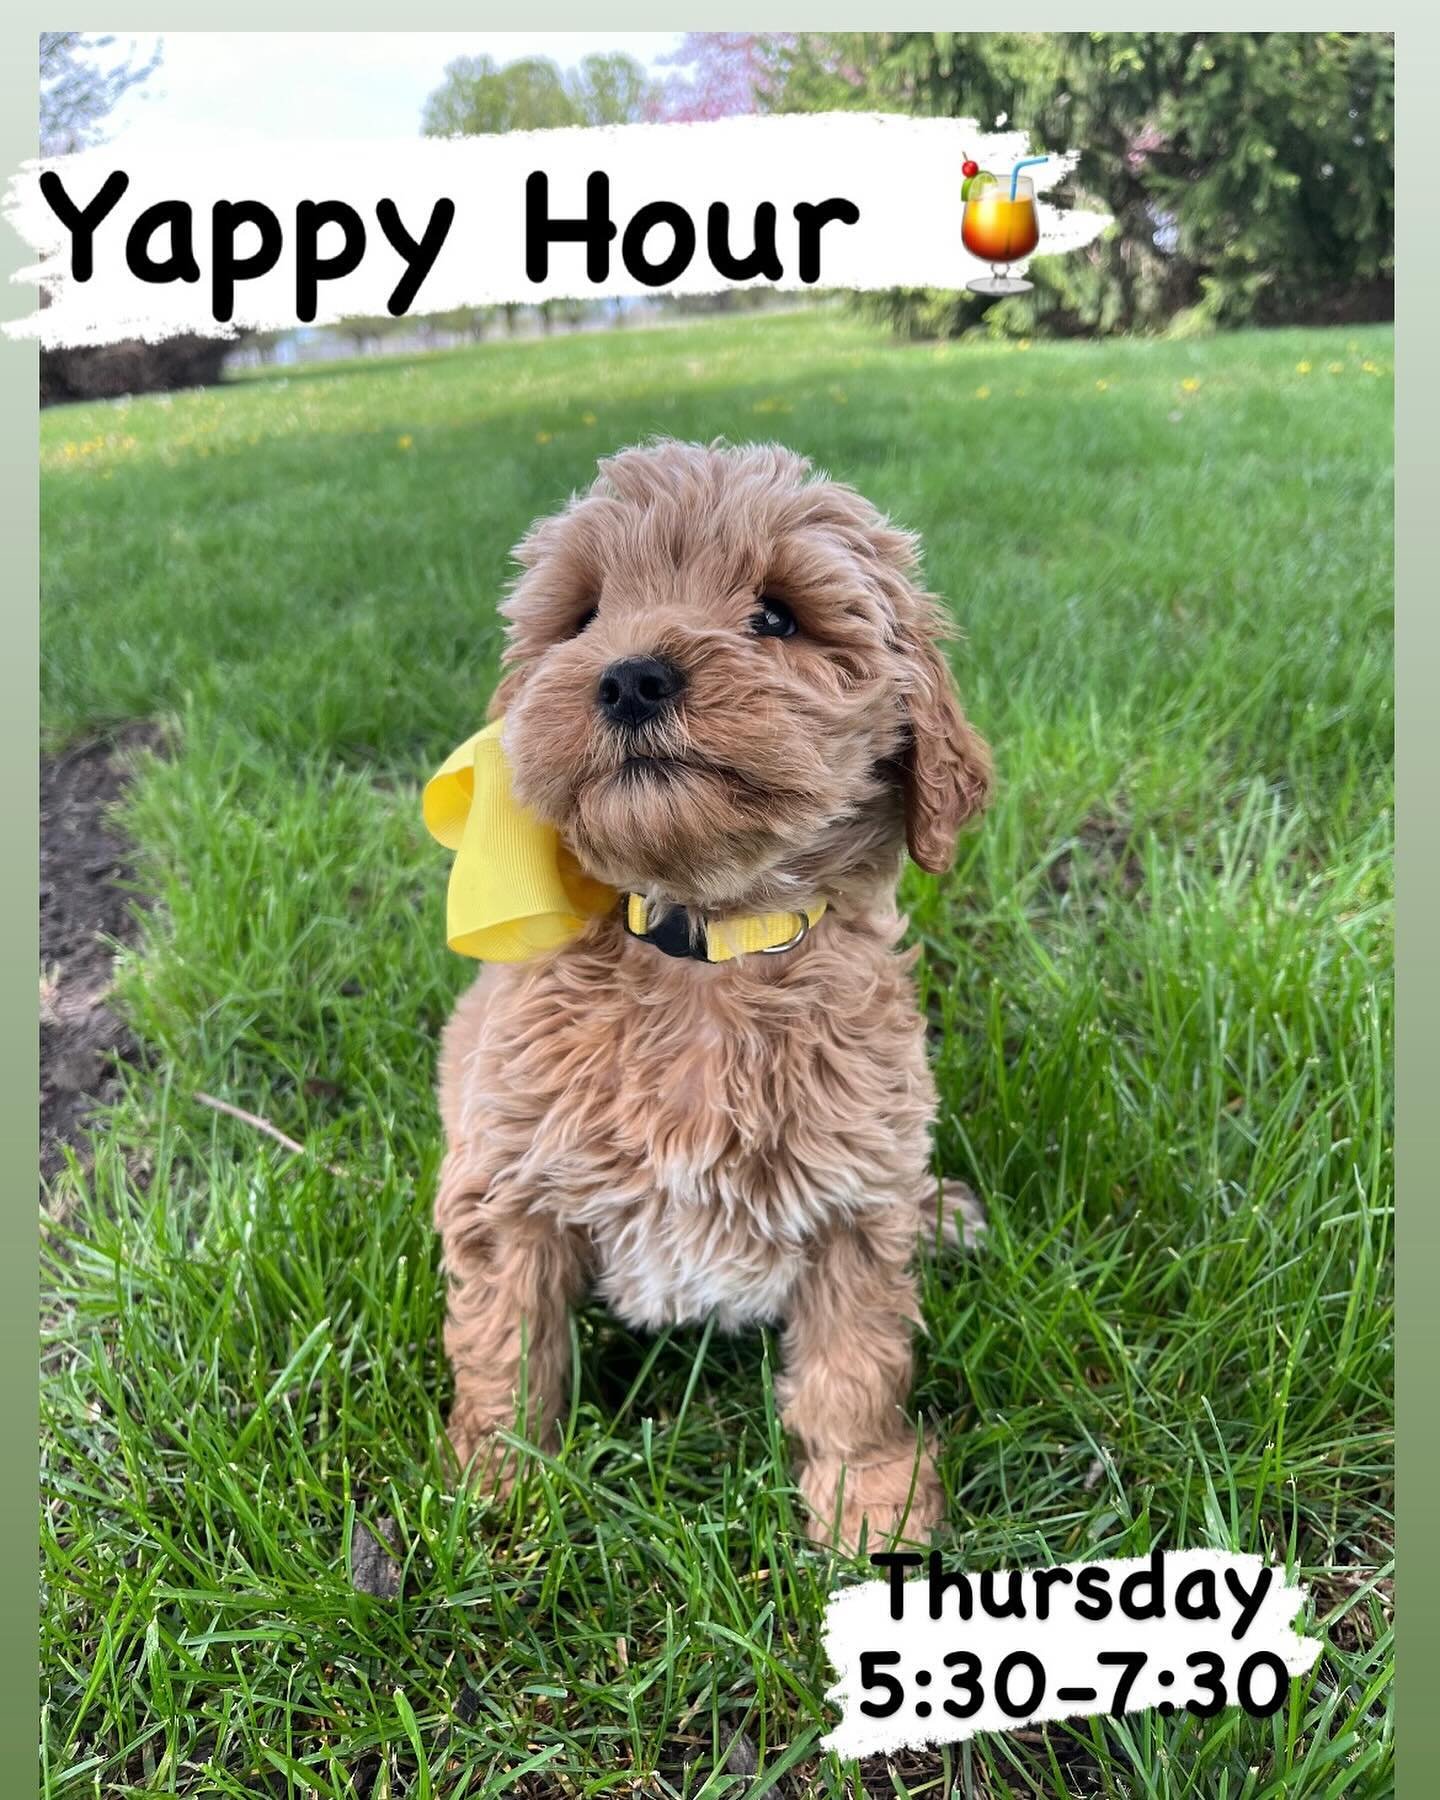 We&rsquo;re hosting a little get together this Thursday from 5:30-7:30! Mocktails and juice boxes included. Grab a few friends and head out to the farm to socialize with some puppies. 

Message us to RSVP.